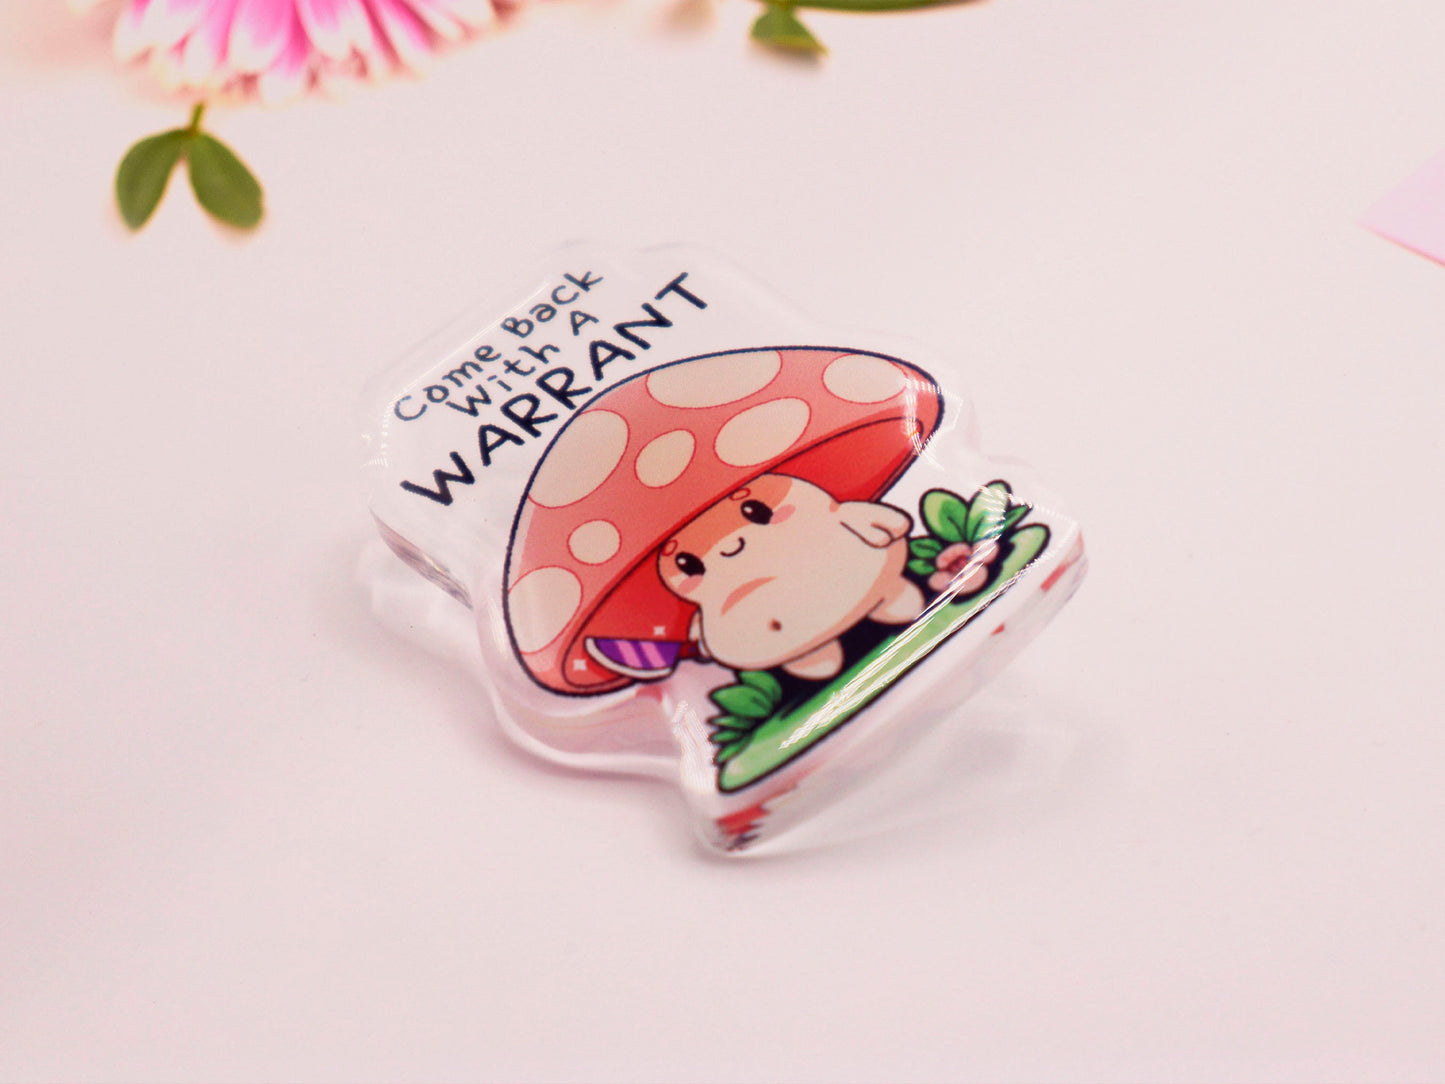 Acrylic Pin Badge of a smiling but ominous mushroom chibi with the quote come back with a warrant written above.